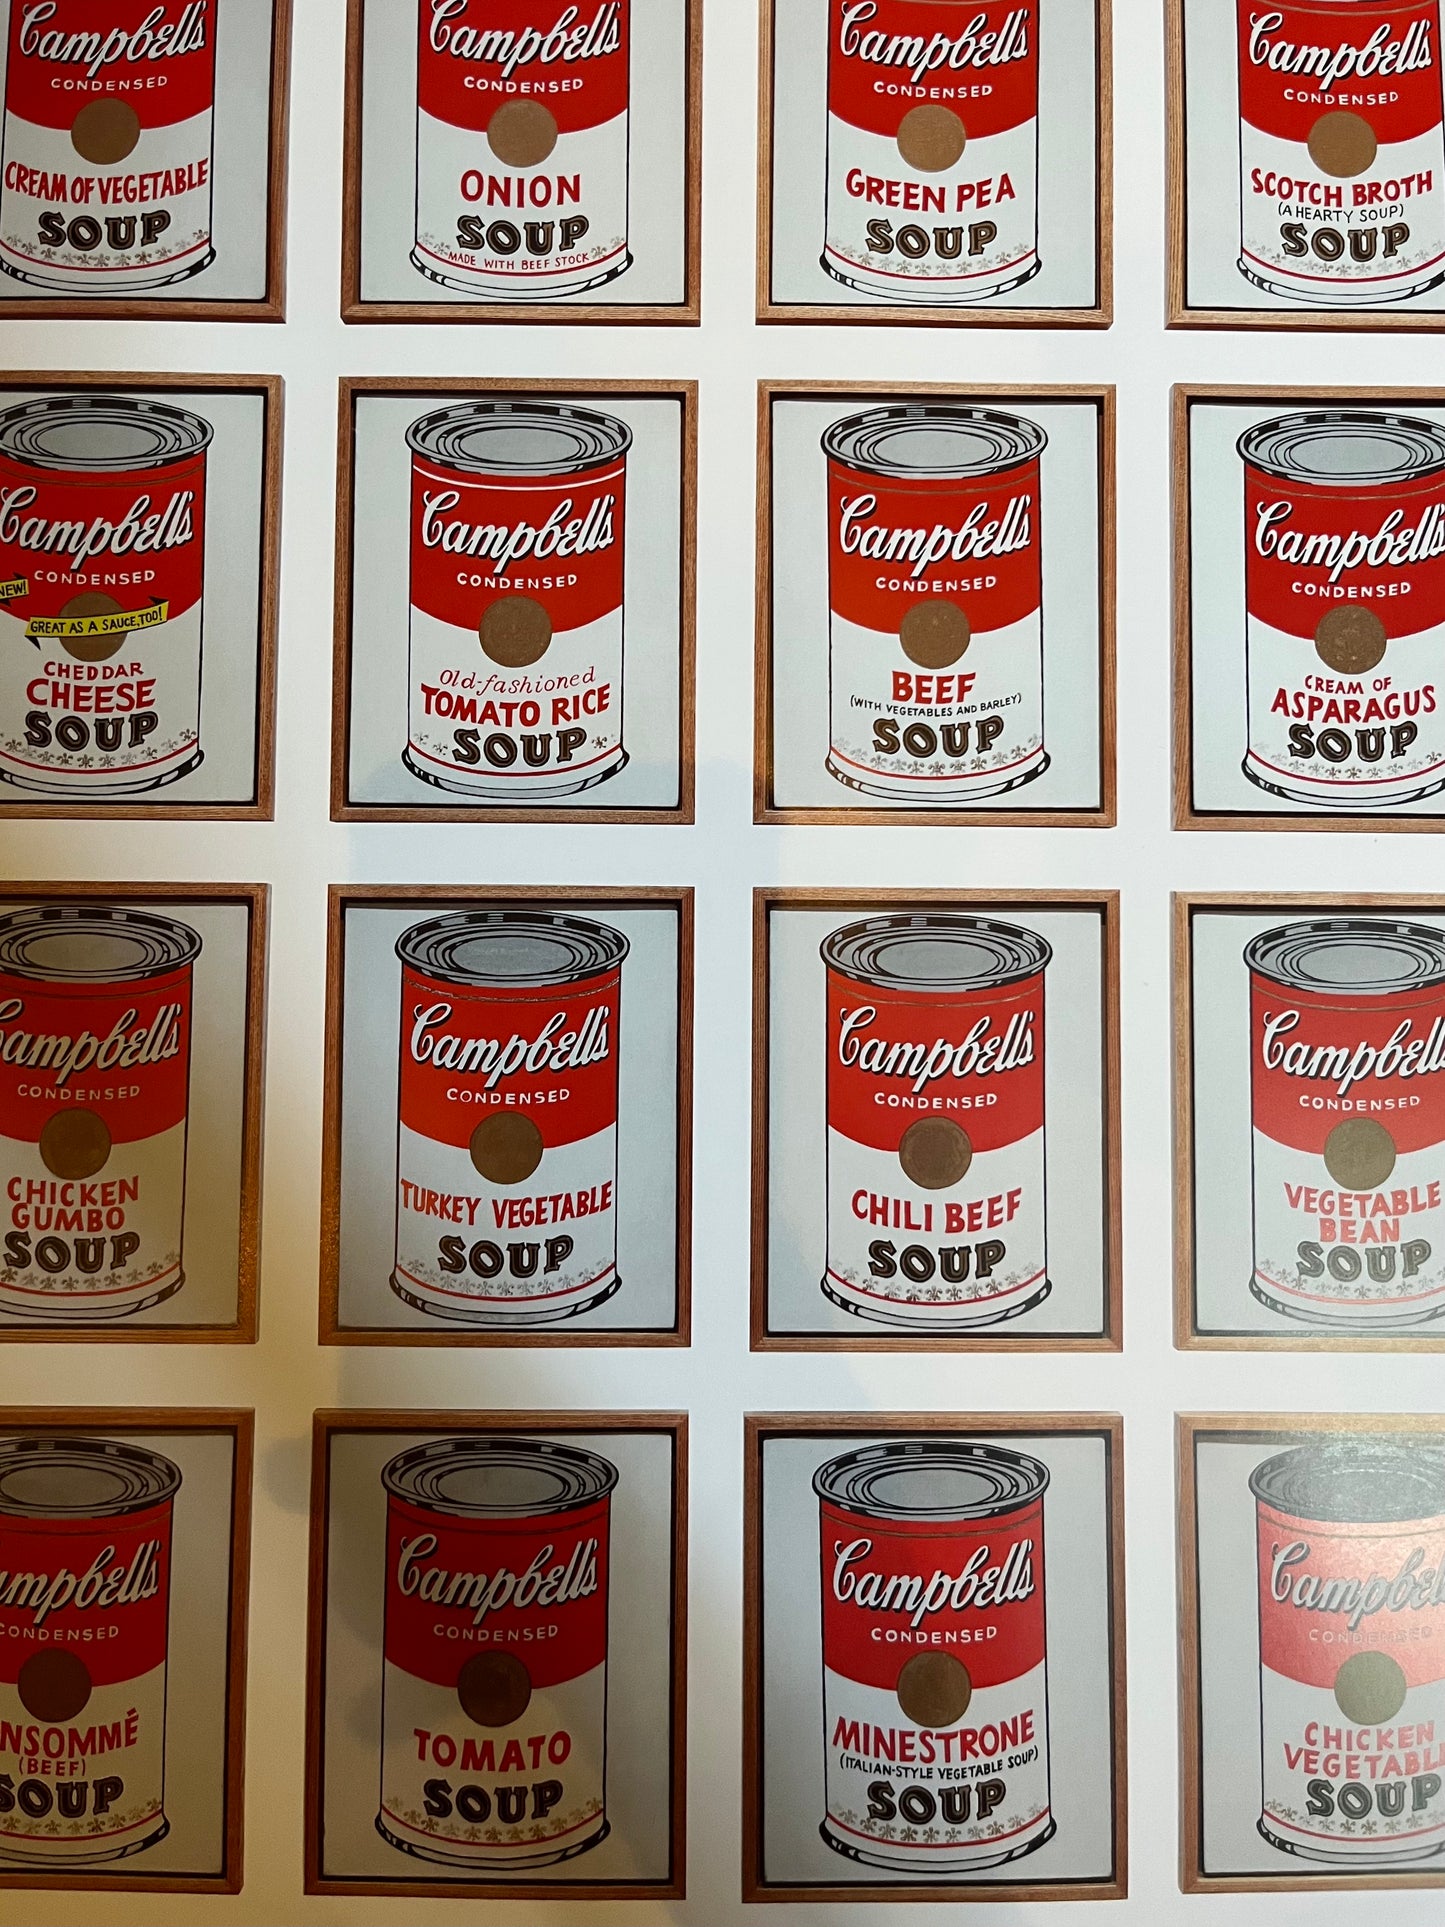 Andy Warhol, Campbell's Soup Cans (1962), Offset Lithograph